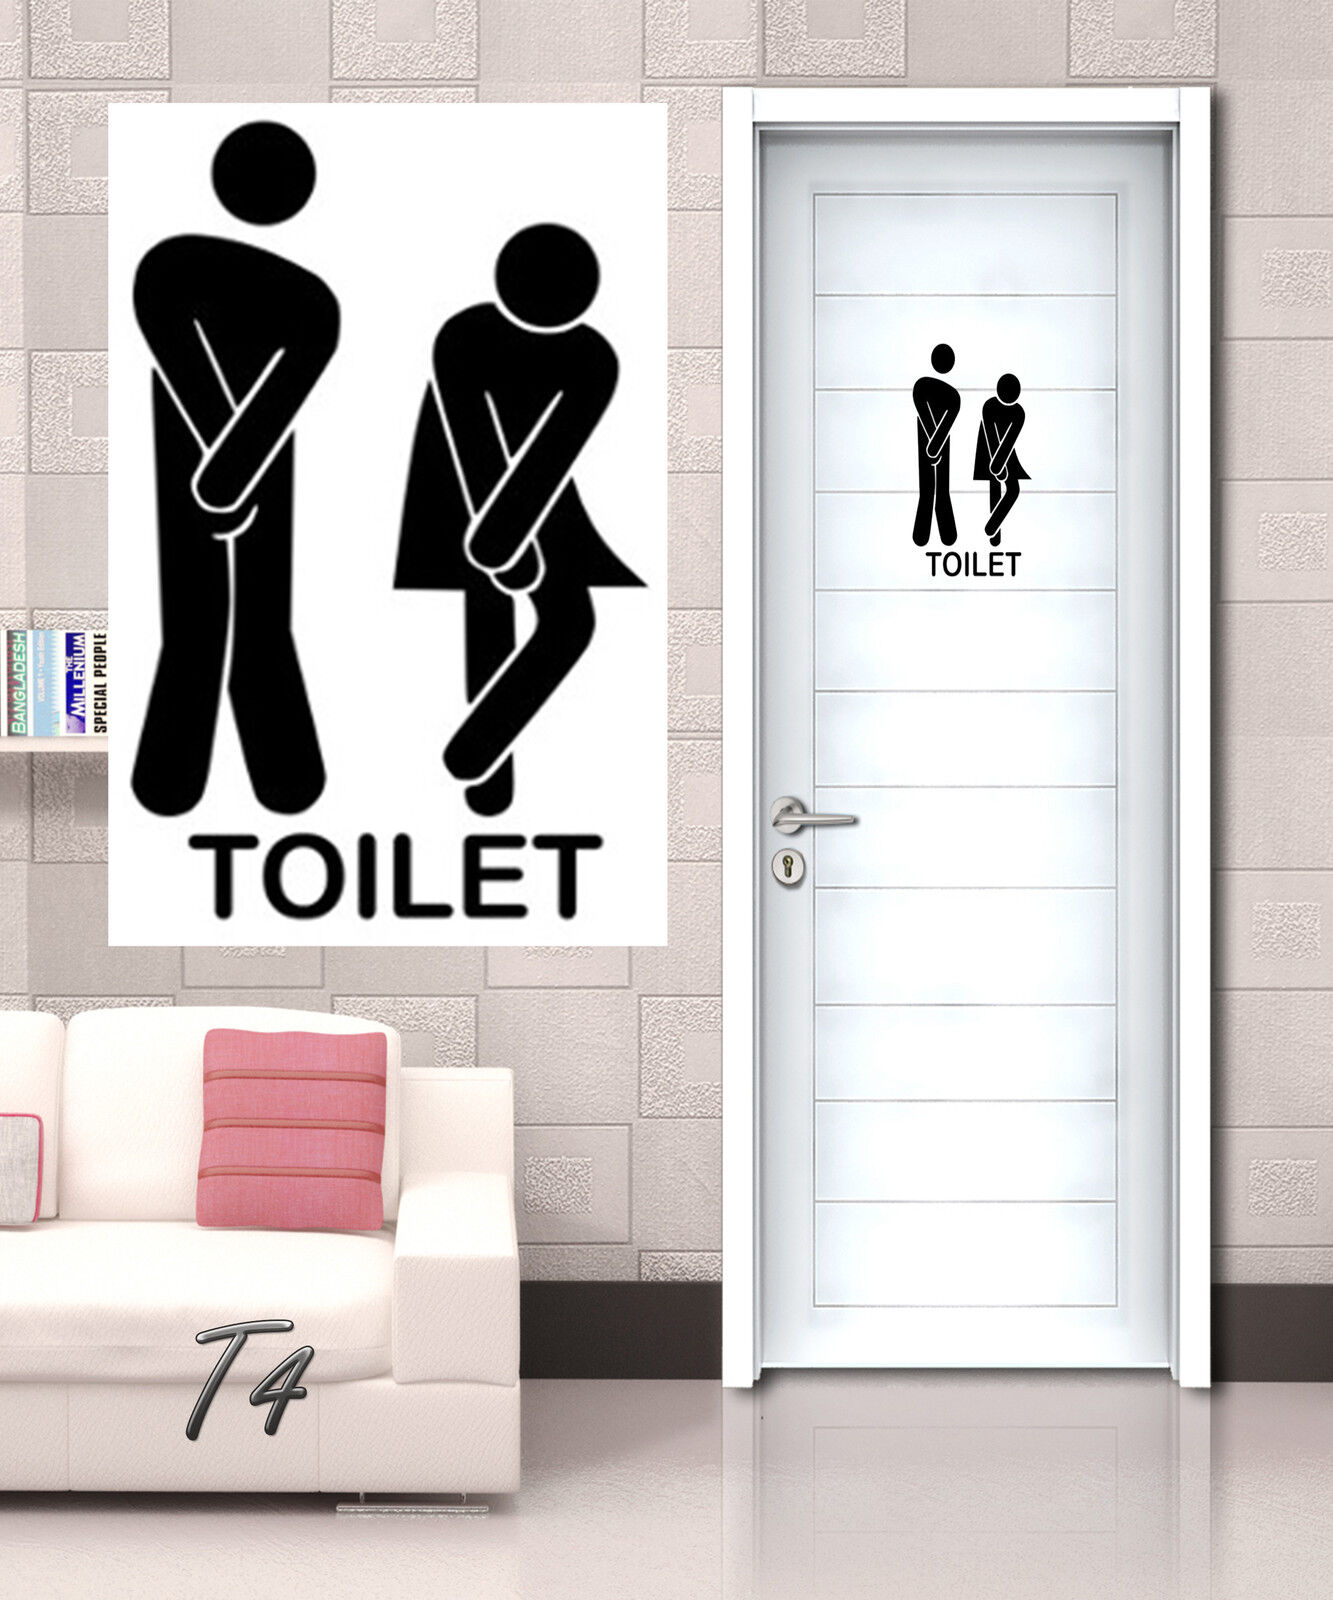 Funny Toilet Entrance Sign Decal Vinyl Sticker For Shop Office Home Cafe Hotel 